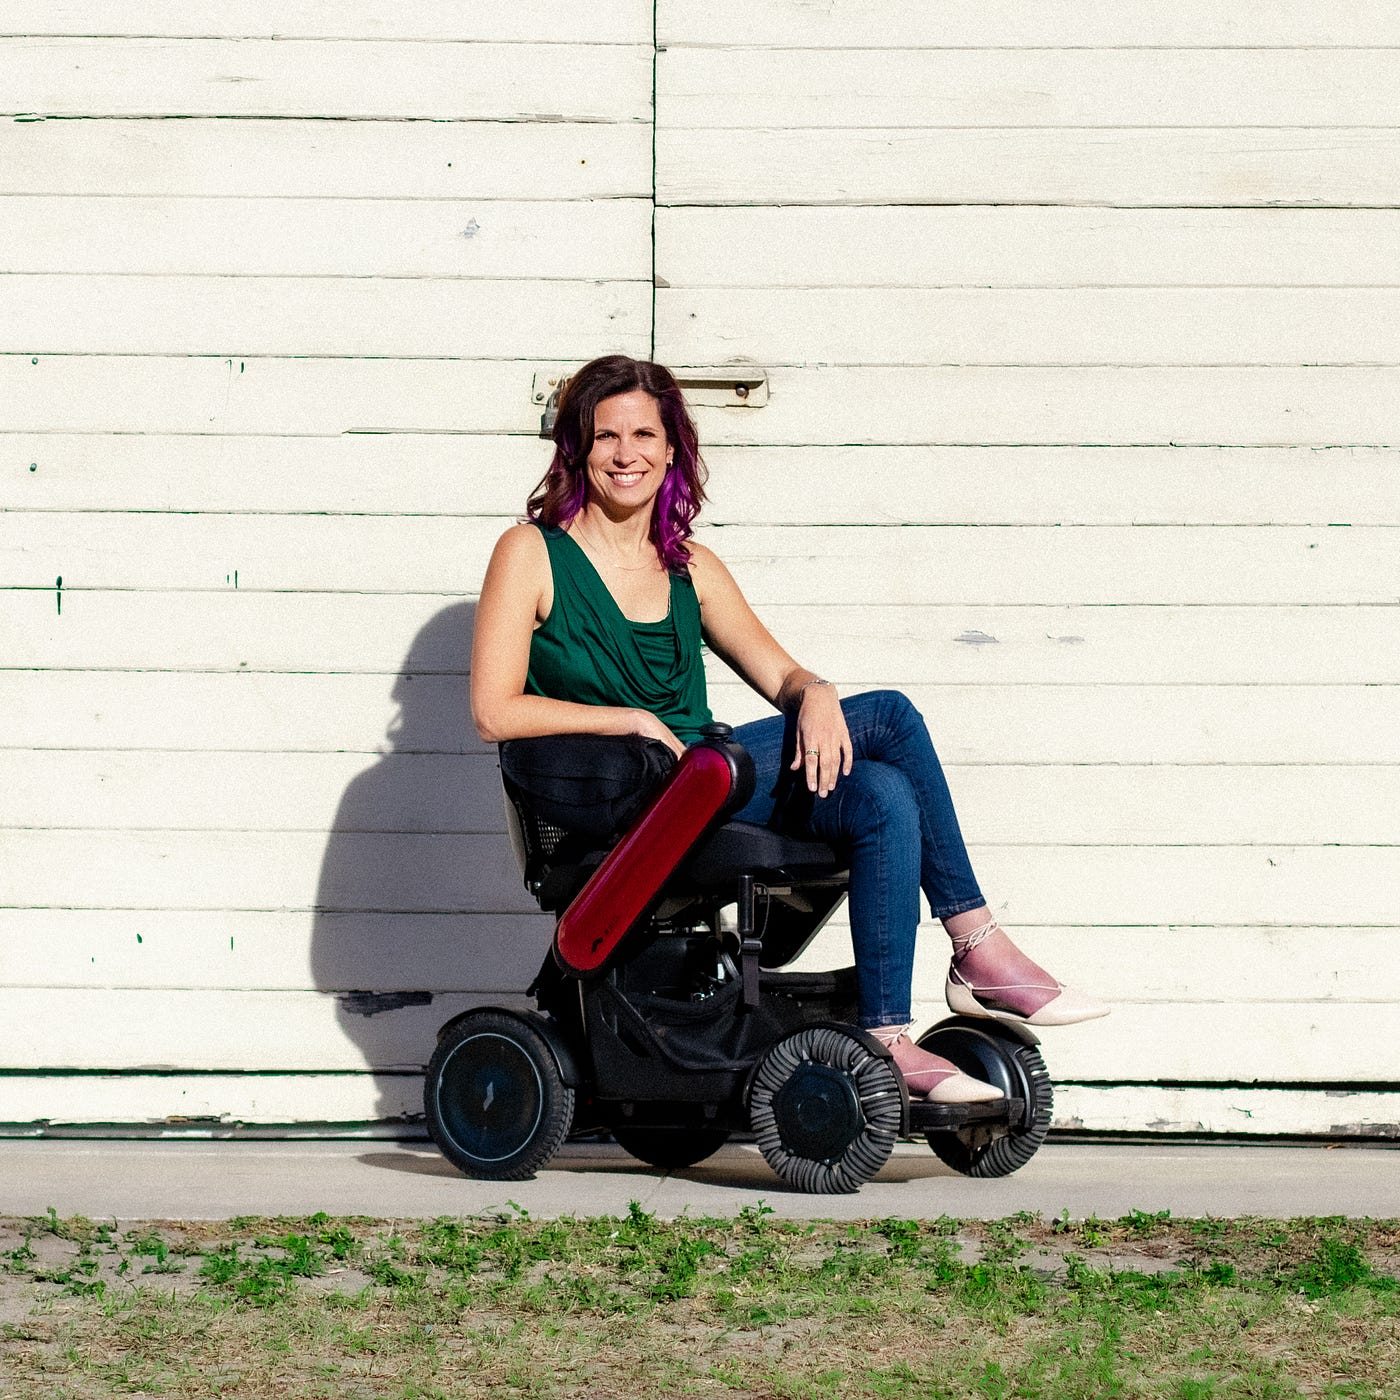 What Online Dating is Really Like for Women in Wheelchairs by Sylvia Longmire Medium pic picture